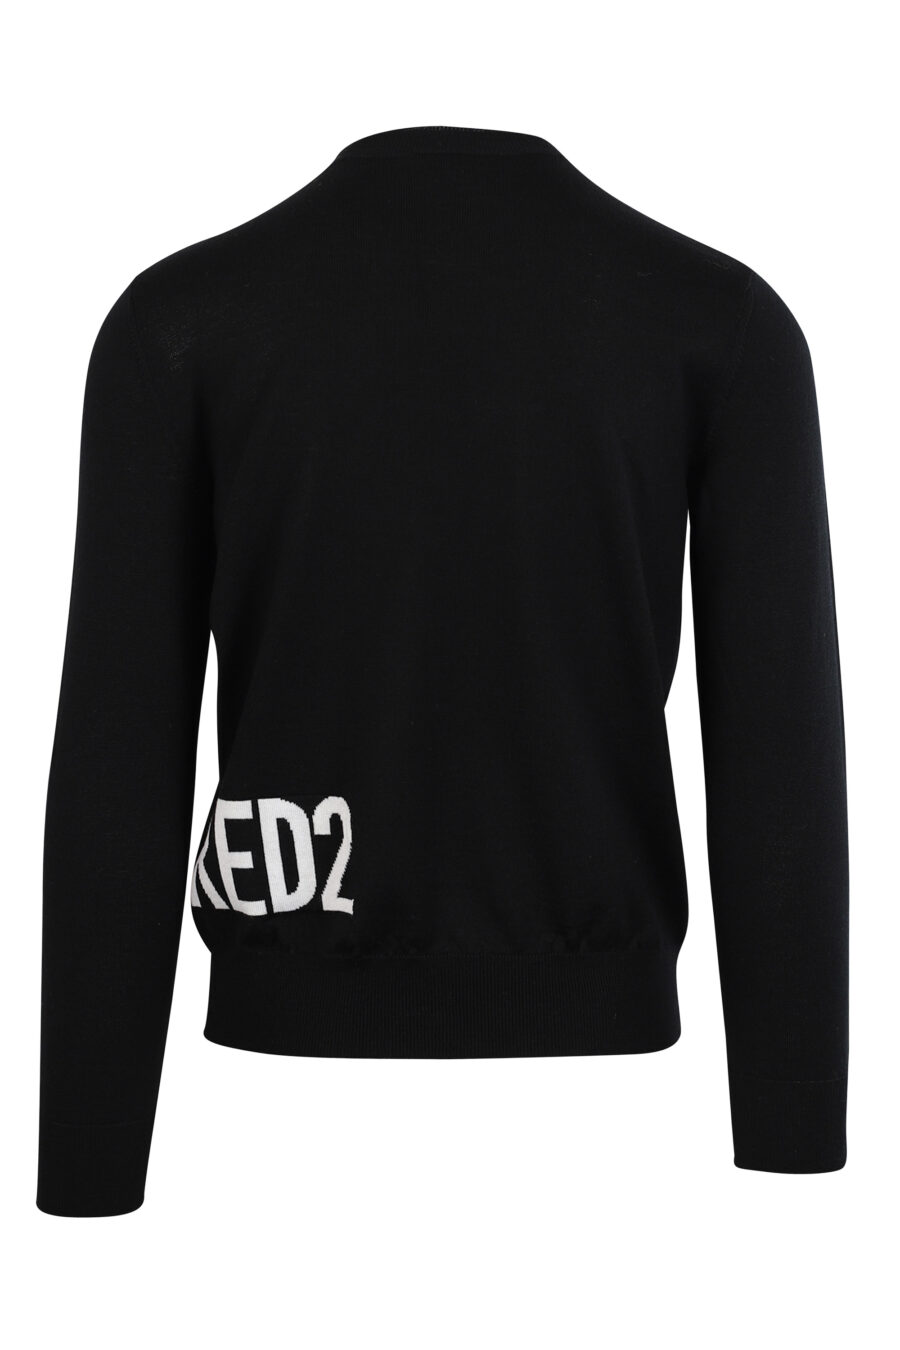 Black jumper with white side maxilogue - 8054148066710 2